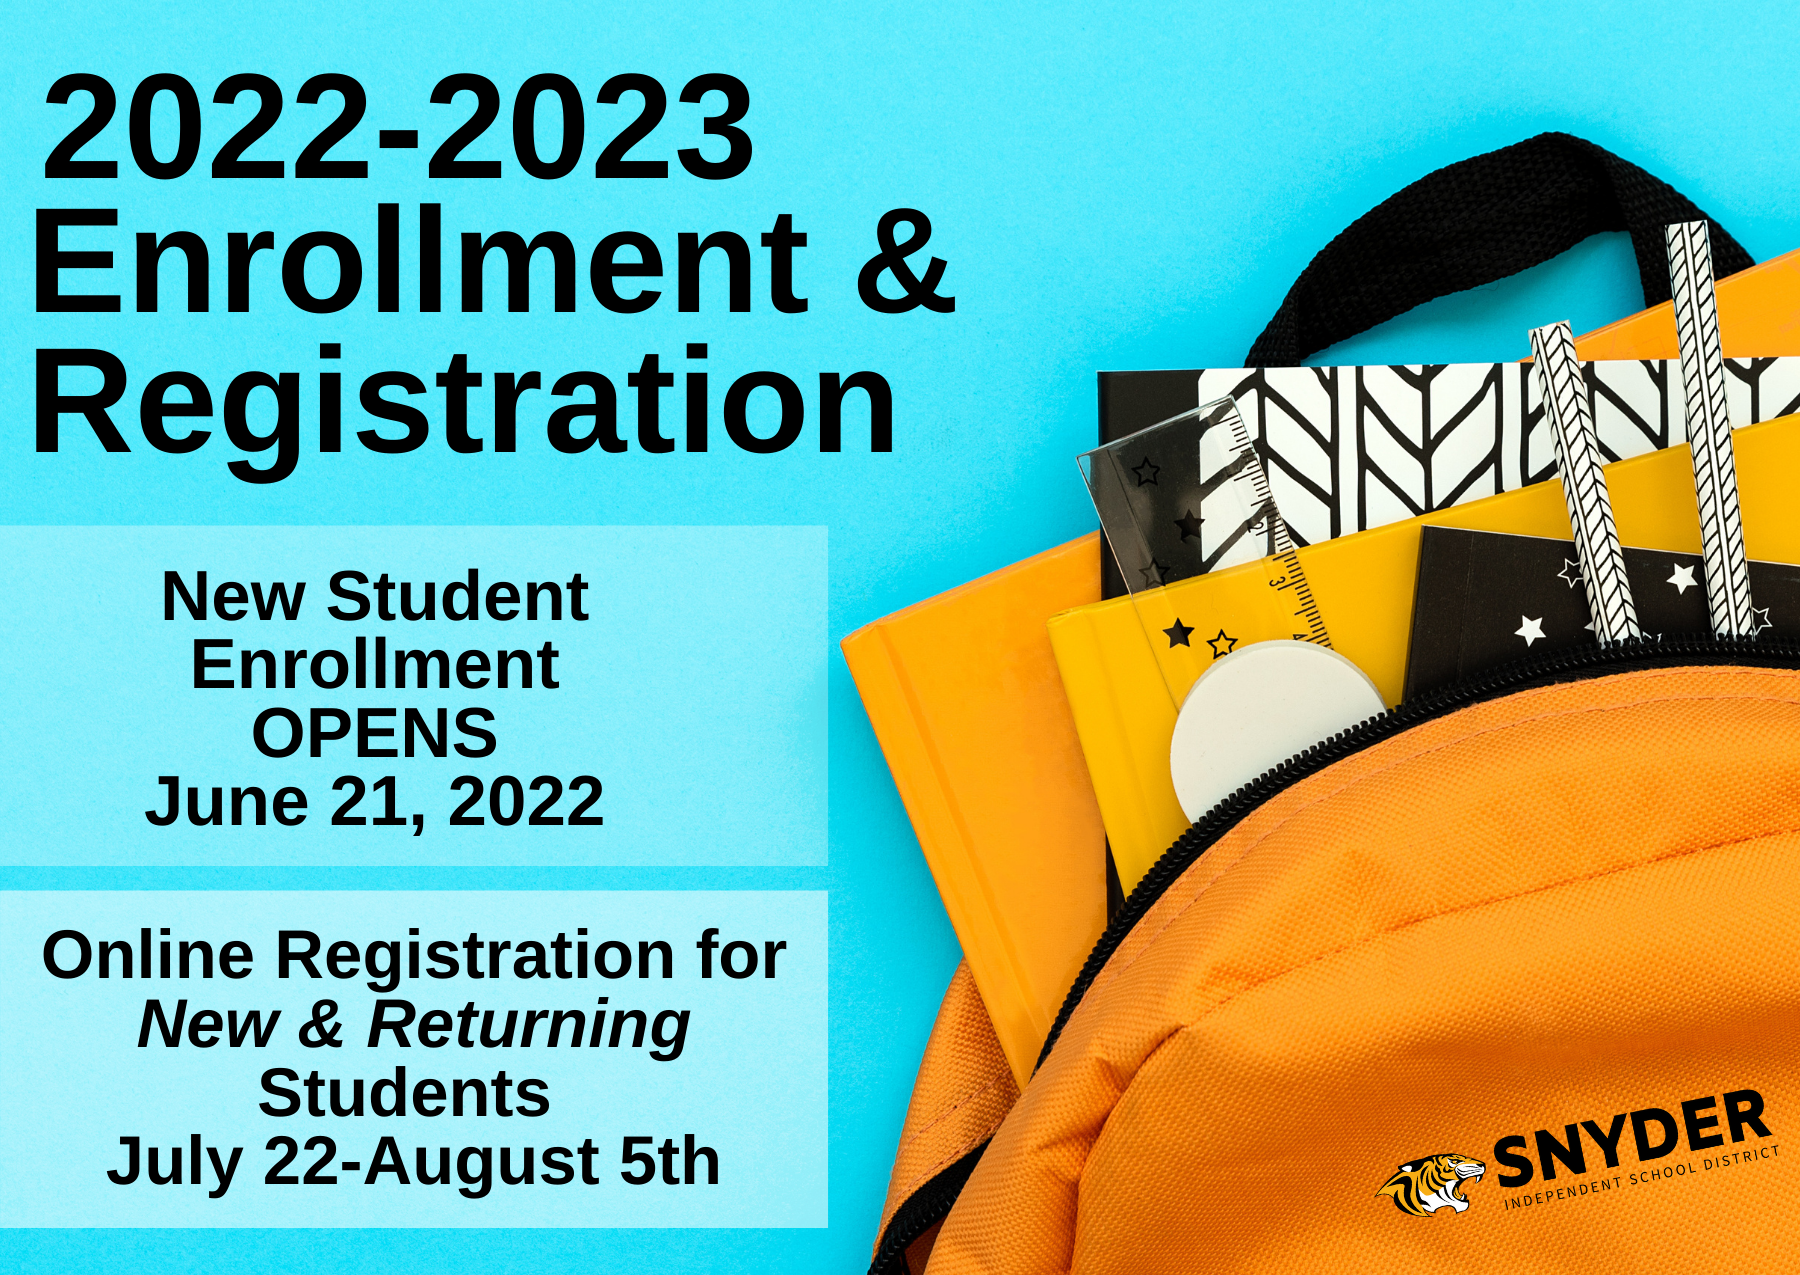 Enrollmen t and registration promo graphic.  all text is repeated within the information below